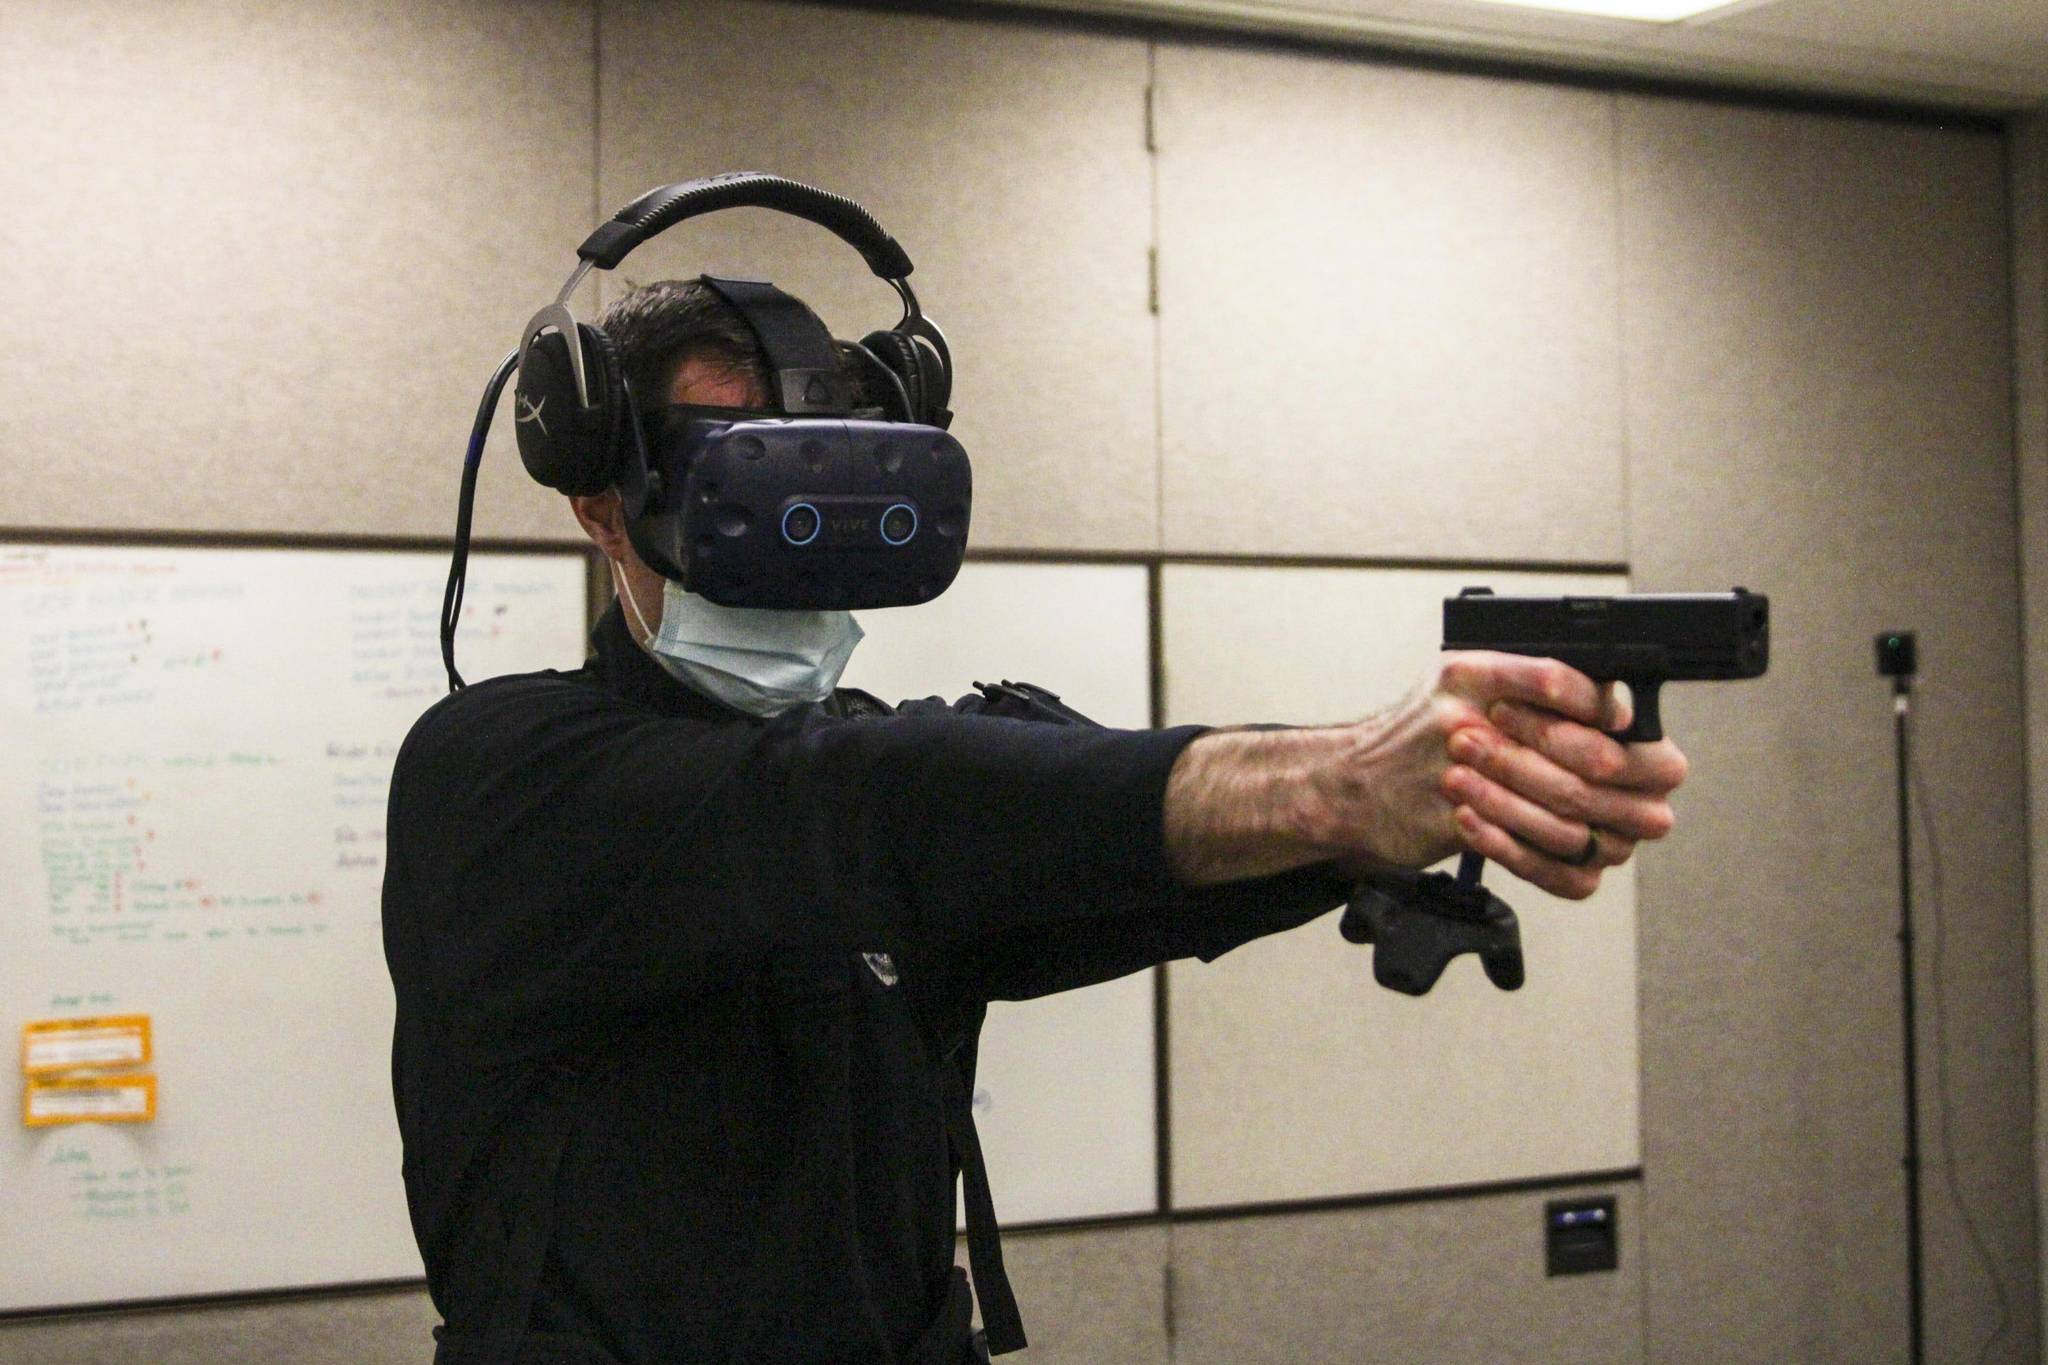 Detective Patrick Taylor draws a sidearm-controller during a VR training simulation on March 17, 2021 as Sgt. Sterling Salisbury controls the scenario from a computer elsewhere. (Michael S. Lockett / Juneau Empire)